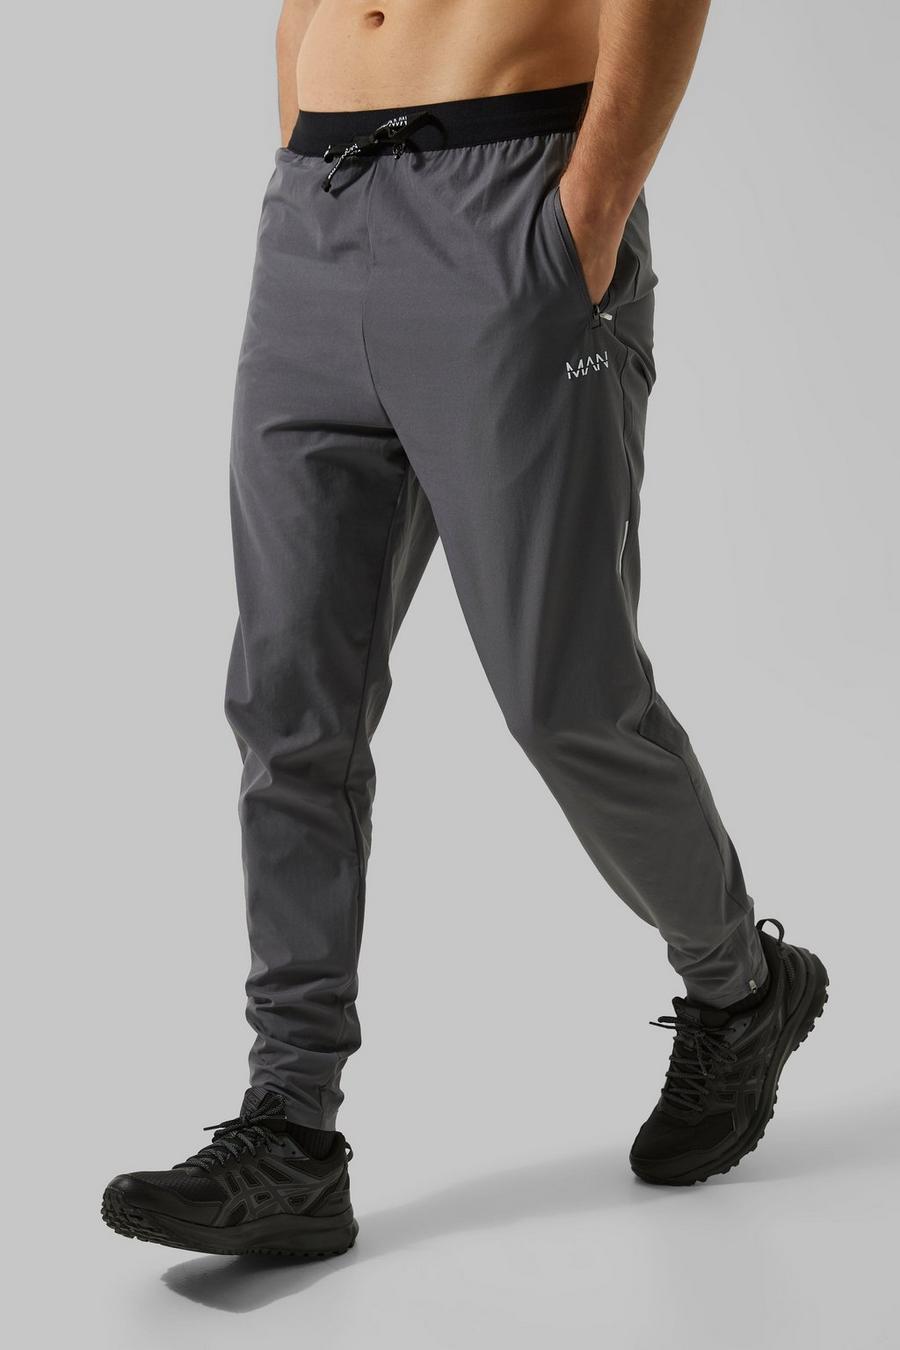 Charcoal grey Tall Man Active Lightweight Performance Joggers 